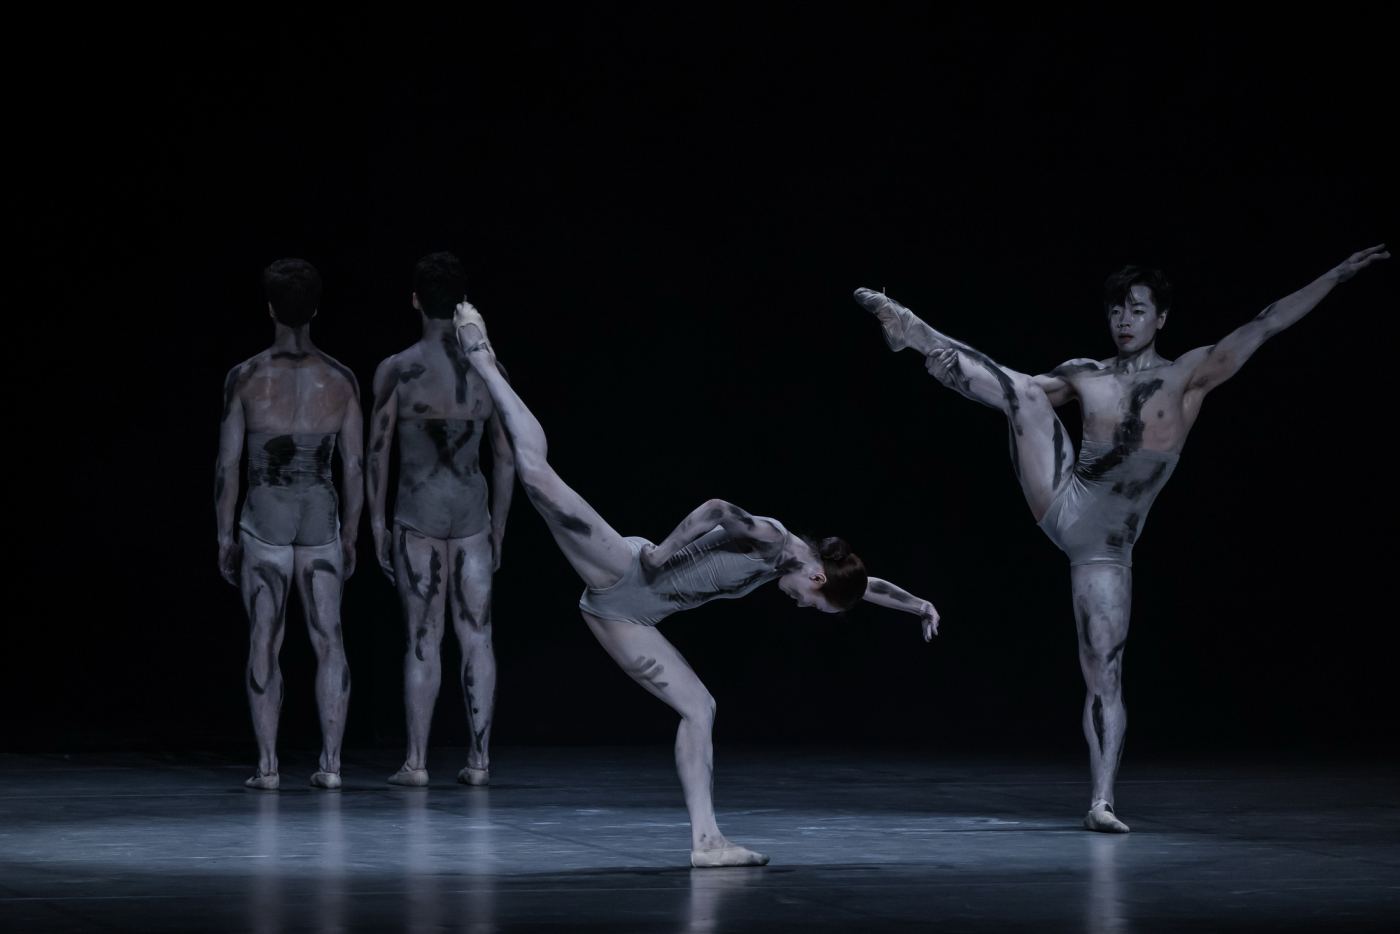 2. Y.Lee, M.Kiyota, and ensemble, “Sad Case” by S.León and P.Lightfoot, Ballet of the Hungarian State Opera 2022 © A.Nagy / Hungarian State Opera 